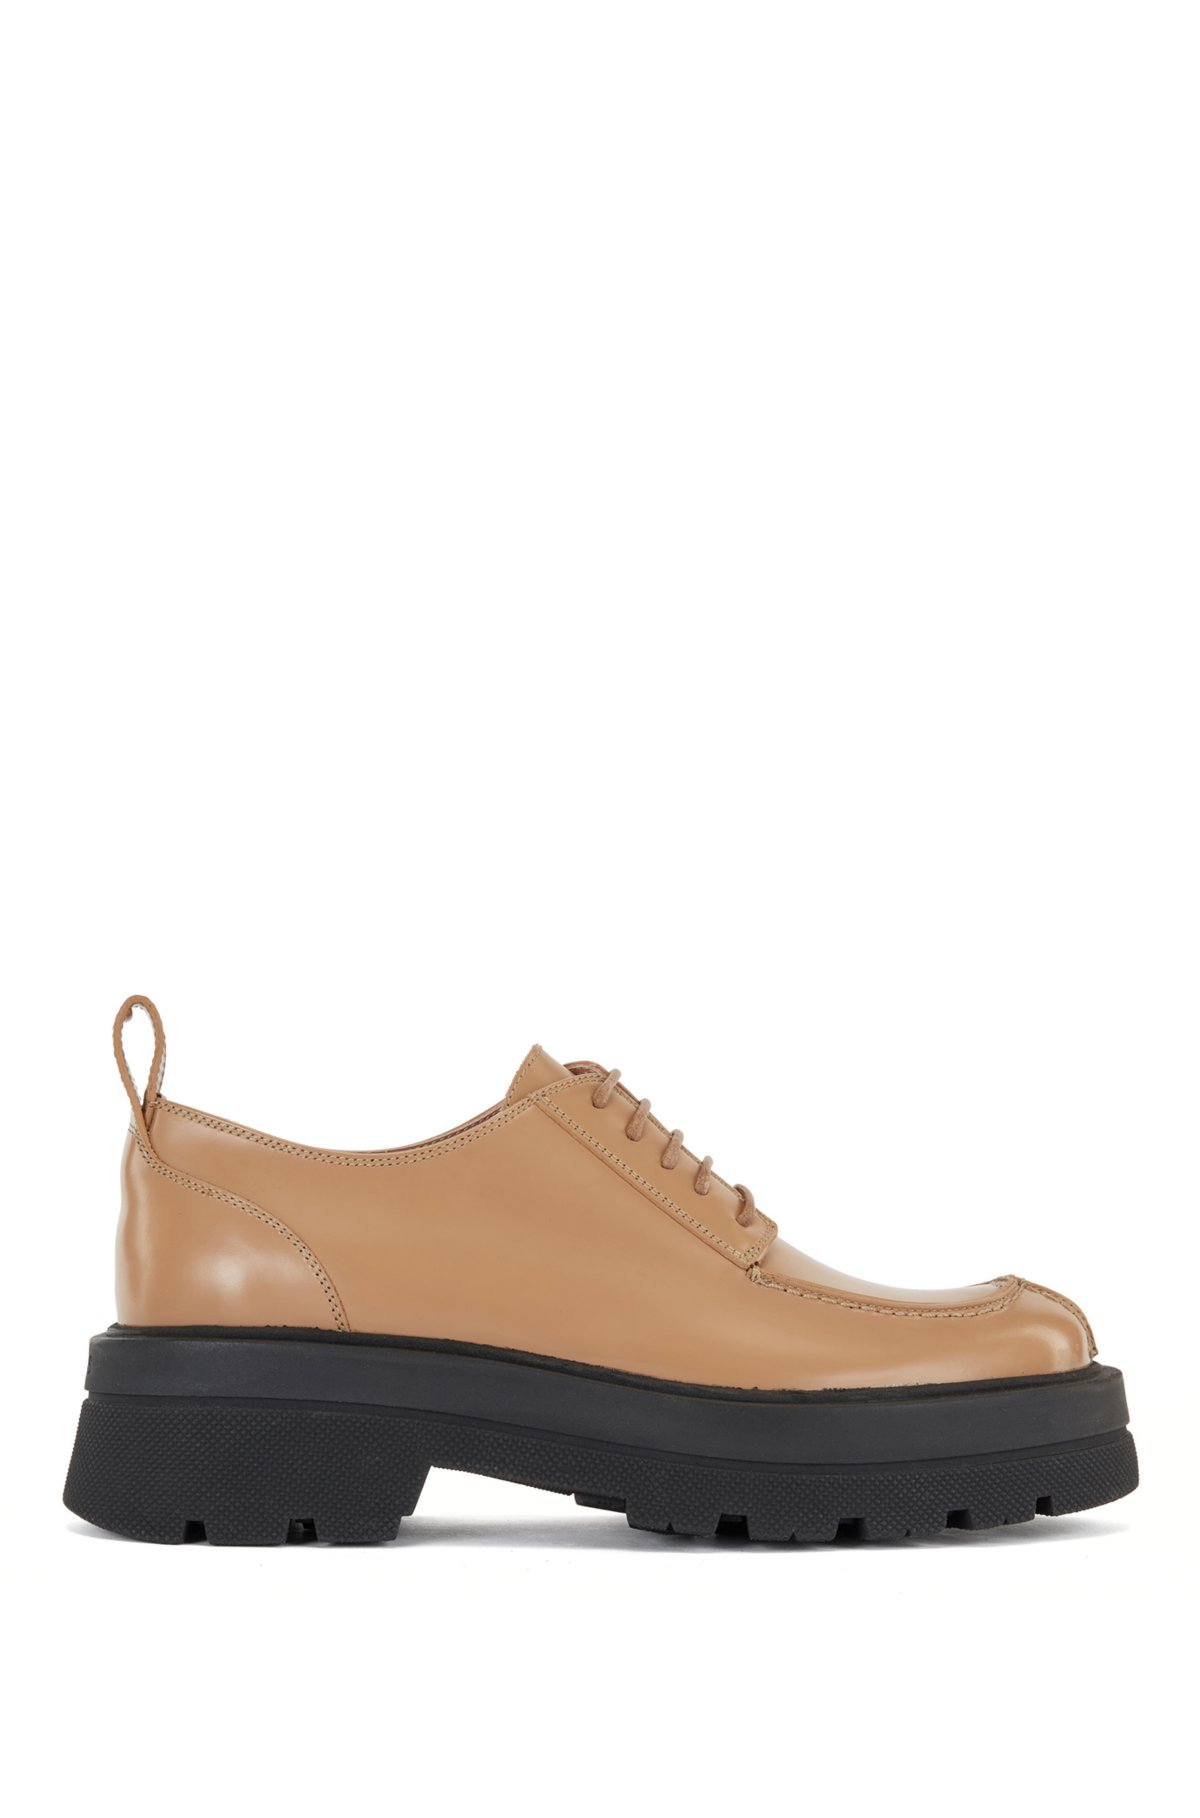 BOSS - Chunky-sole shoes in Italian brush-off leather